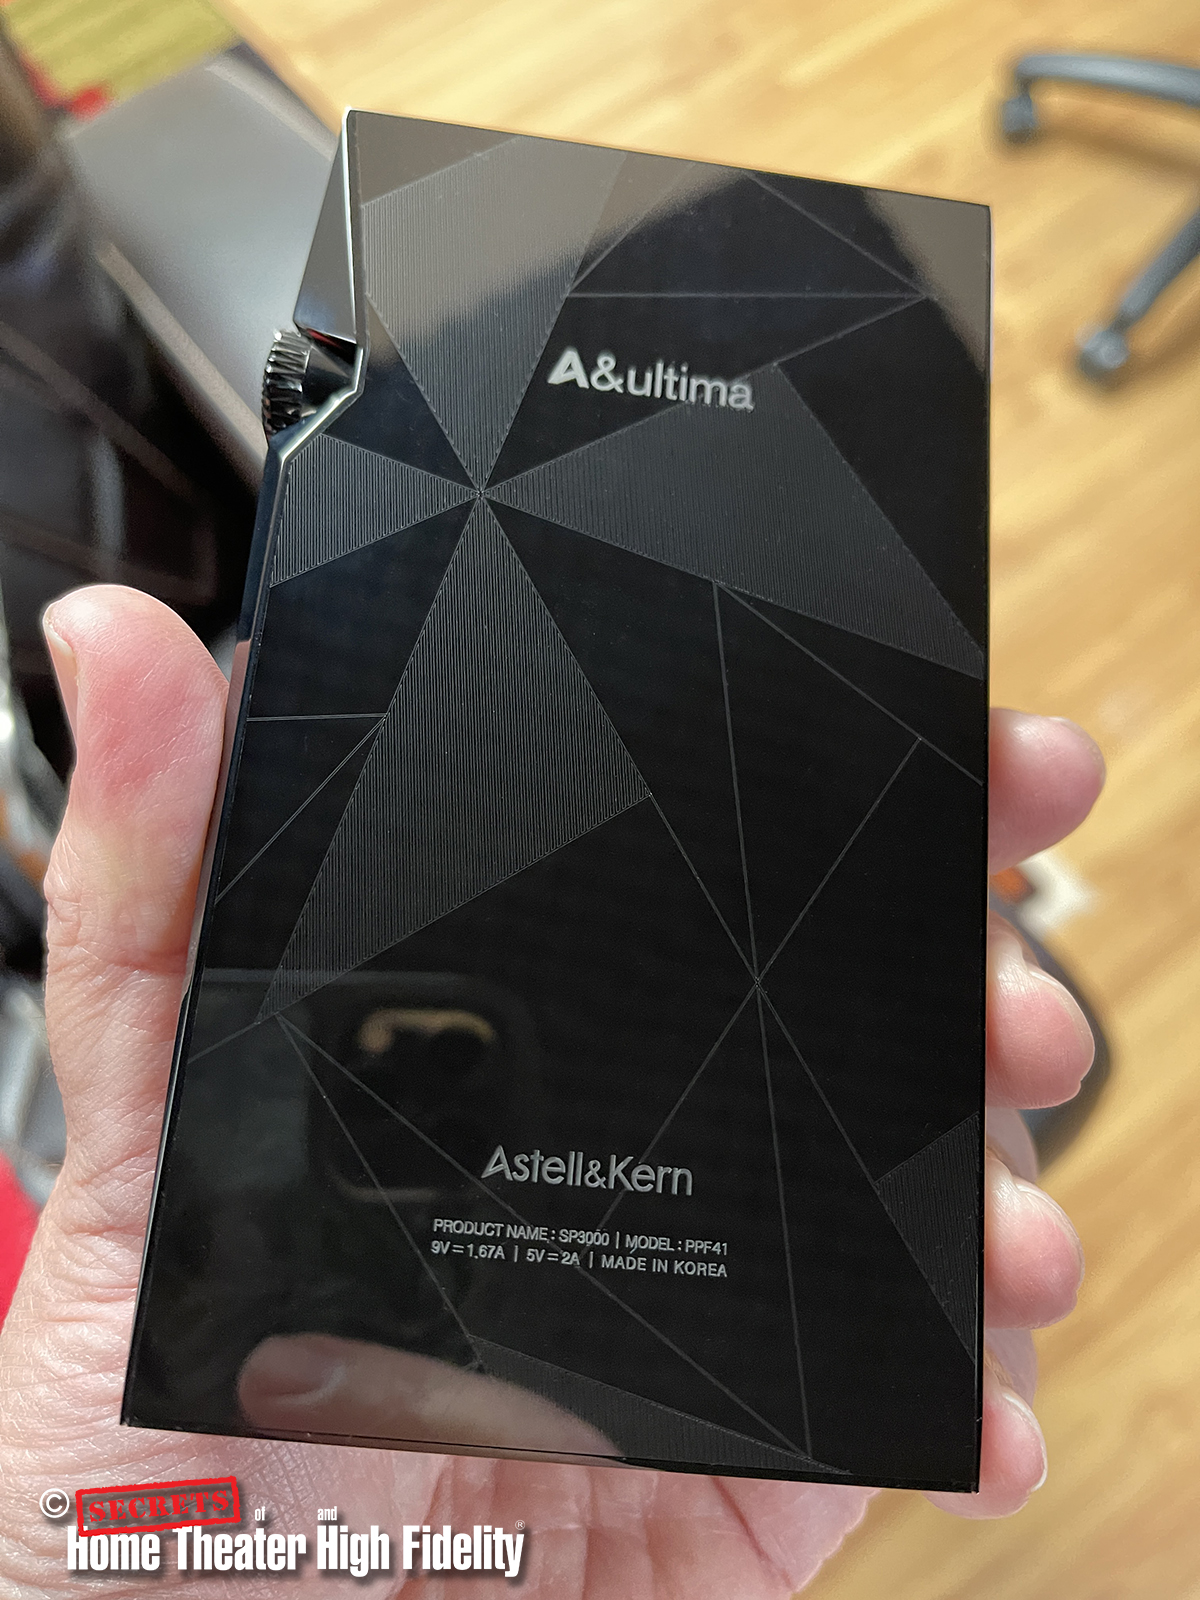 Astell&Kern A&ultima SP3000 Digital Audio Player Review